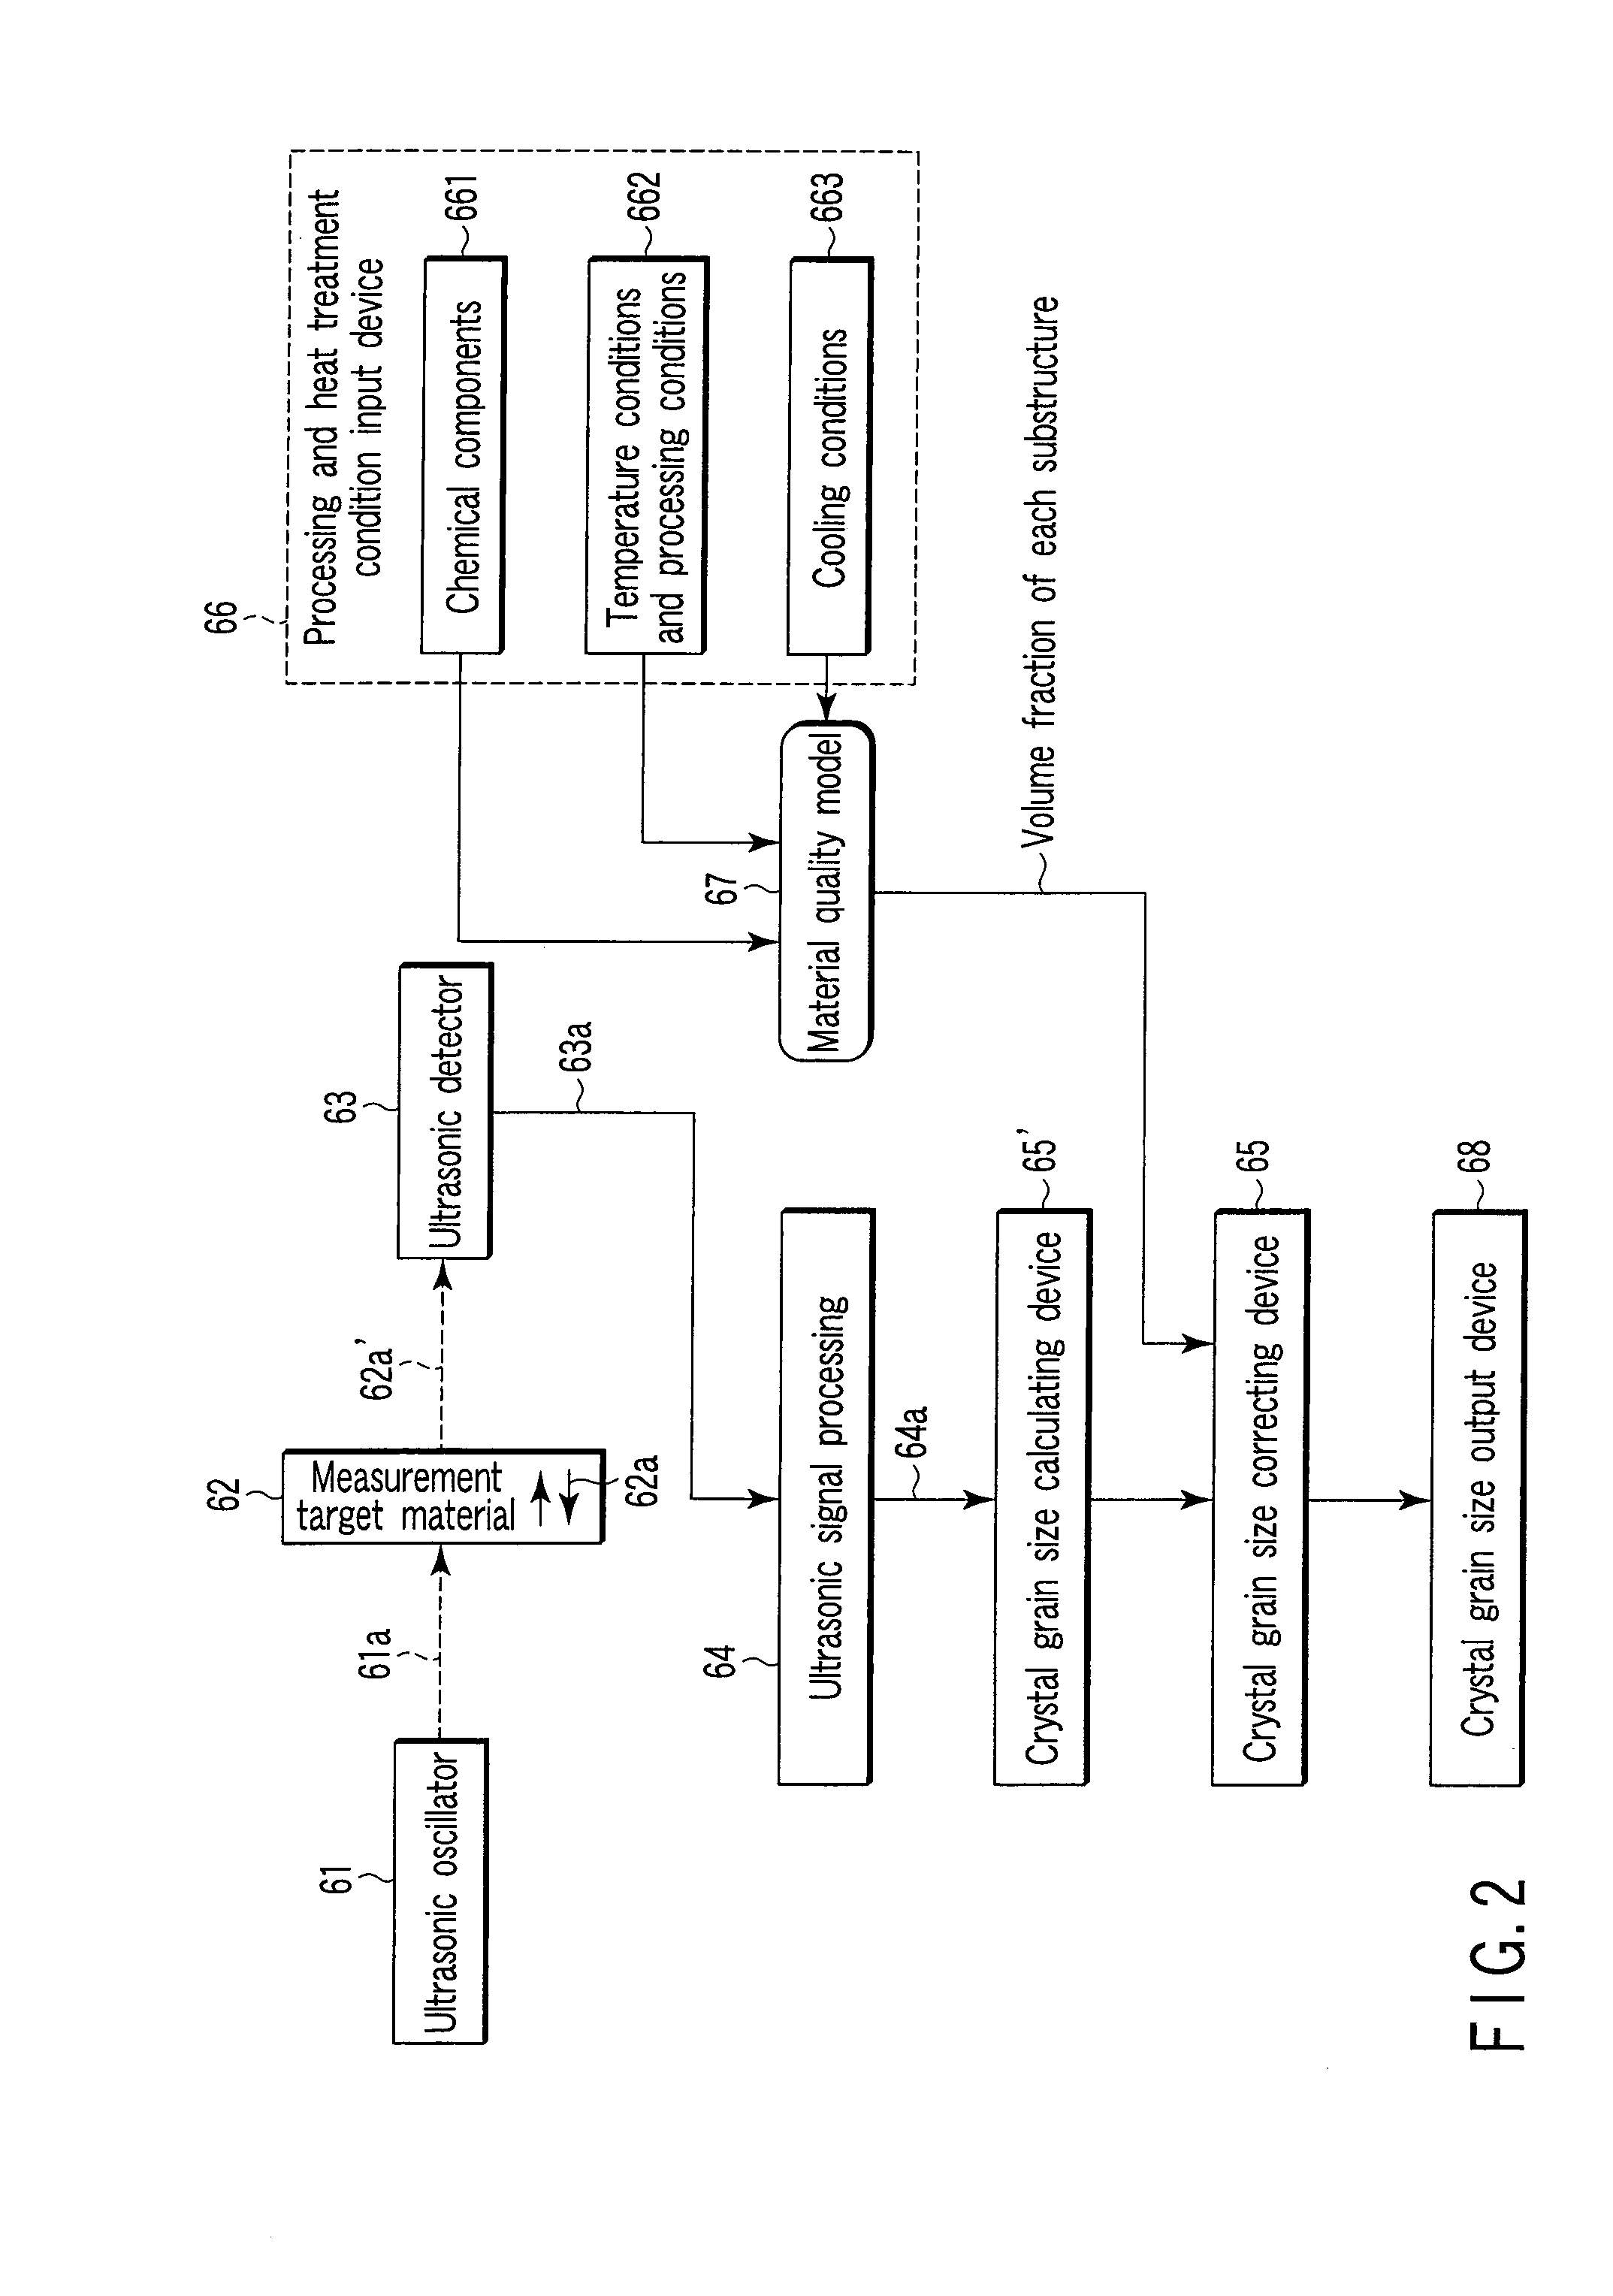 Process line control apparatus and method for controlling process line